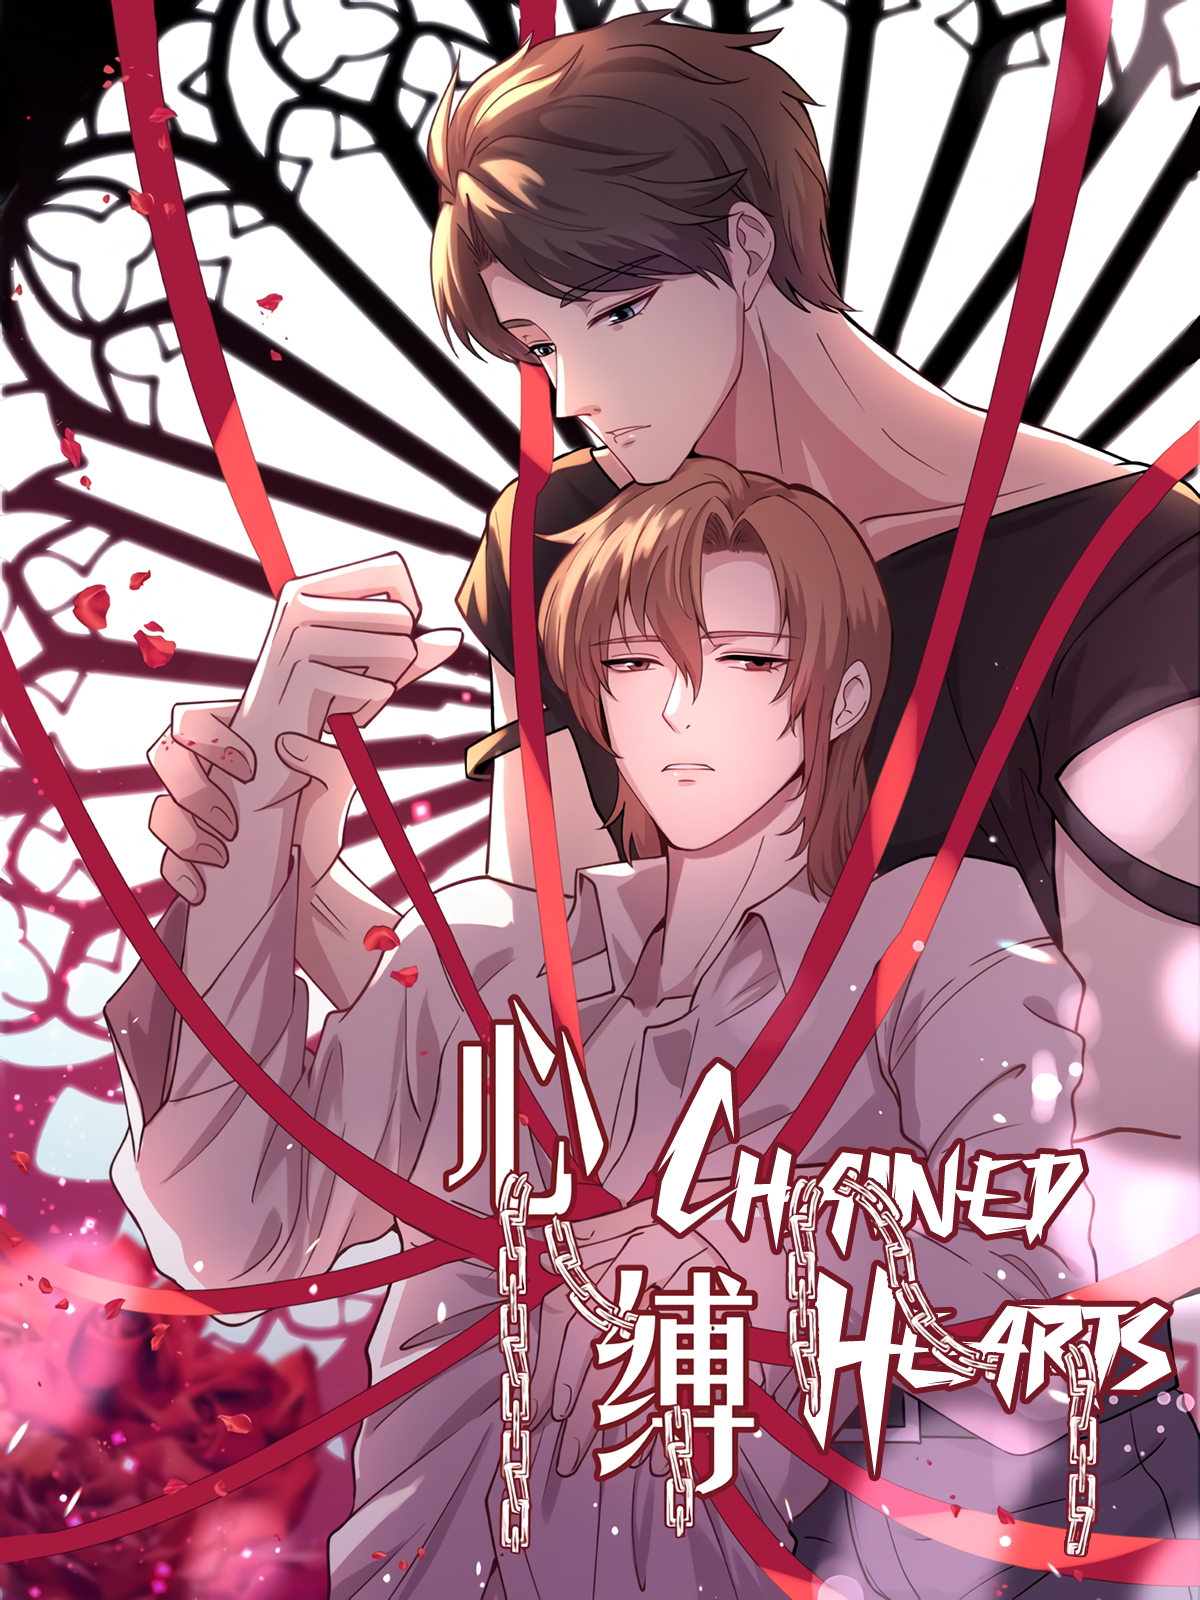 Chained to you manhwa